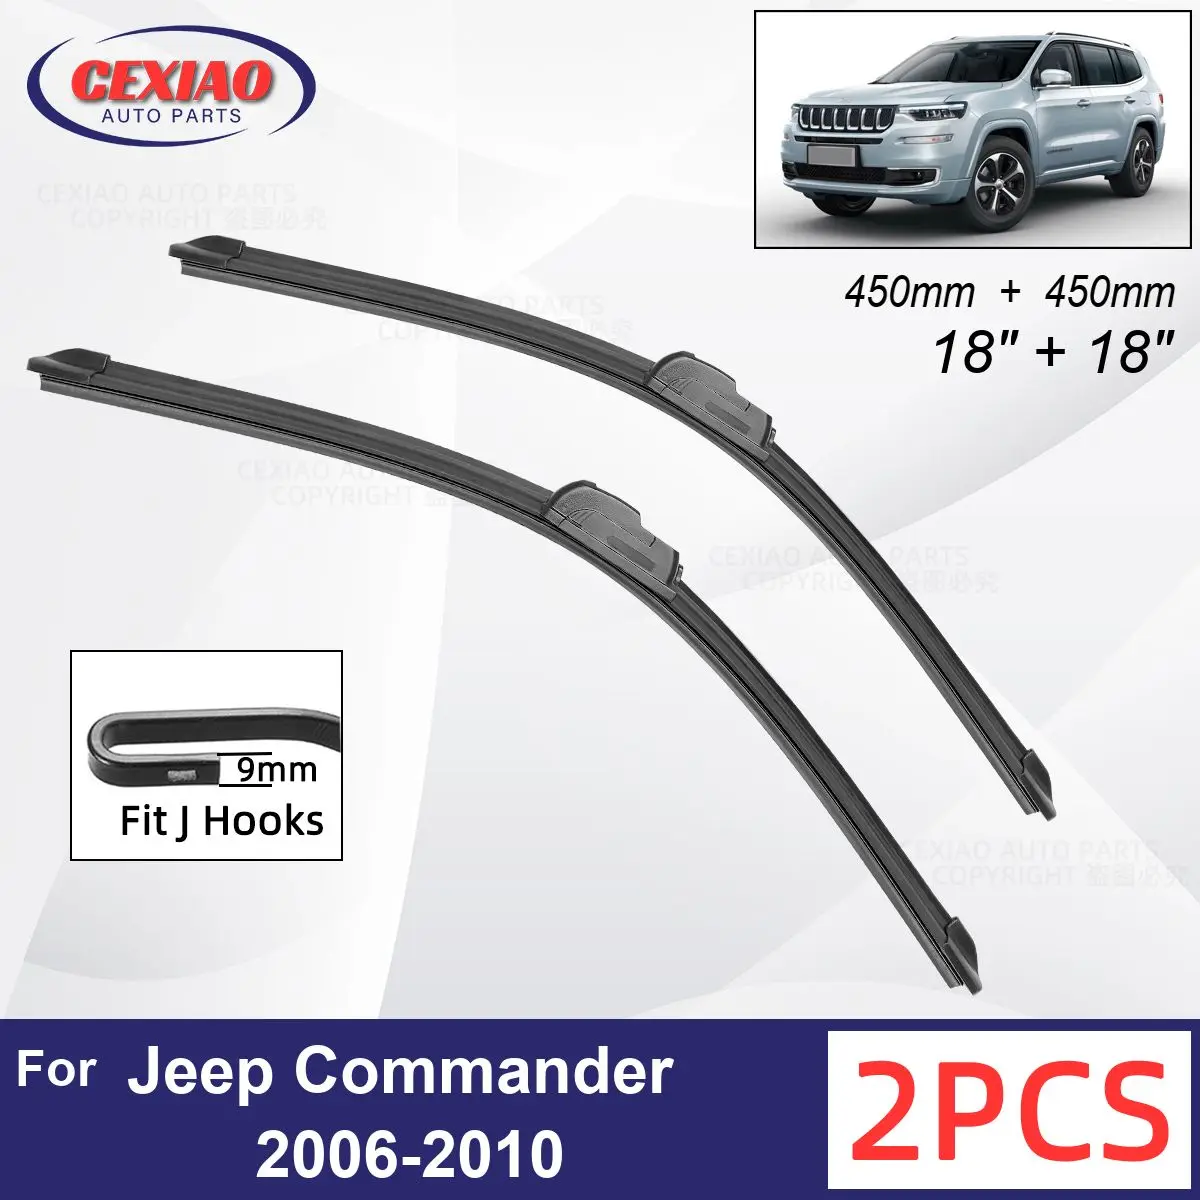 

Car Wiper For Jeep Commander 2006-2010 Front Wiper Blades Soft Rubber Windscreen Wipers Auto Windshield 18"+18" 450mm + 450mm